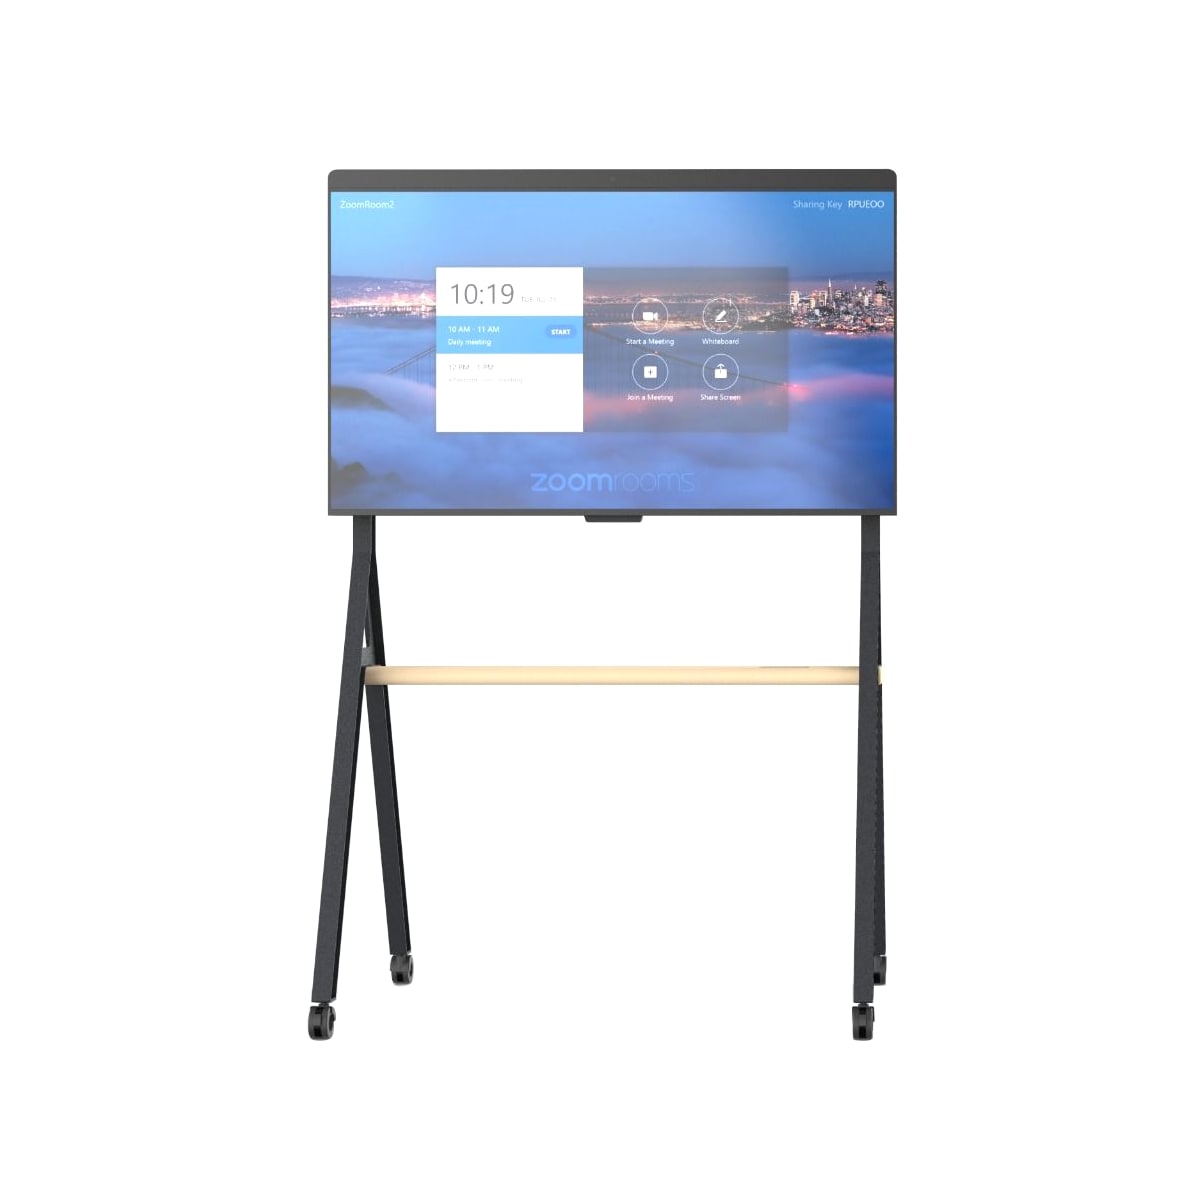 DTEN 400x300 Rolling Mobile Stand for 55" D7 Board - Black Gray